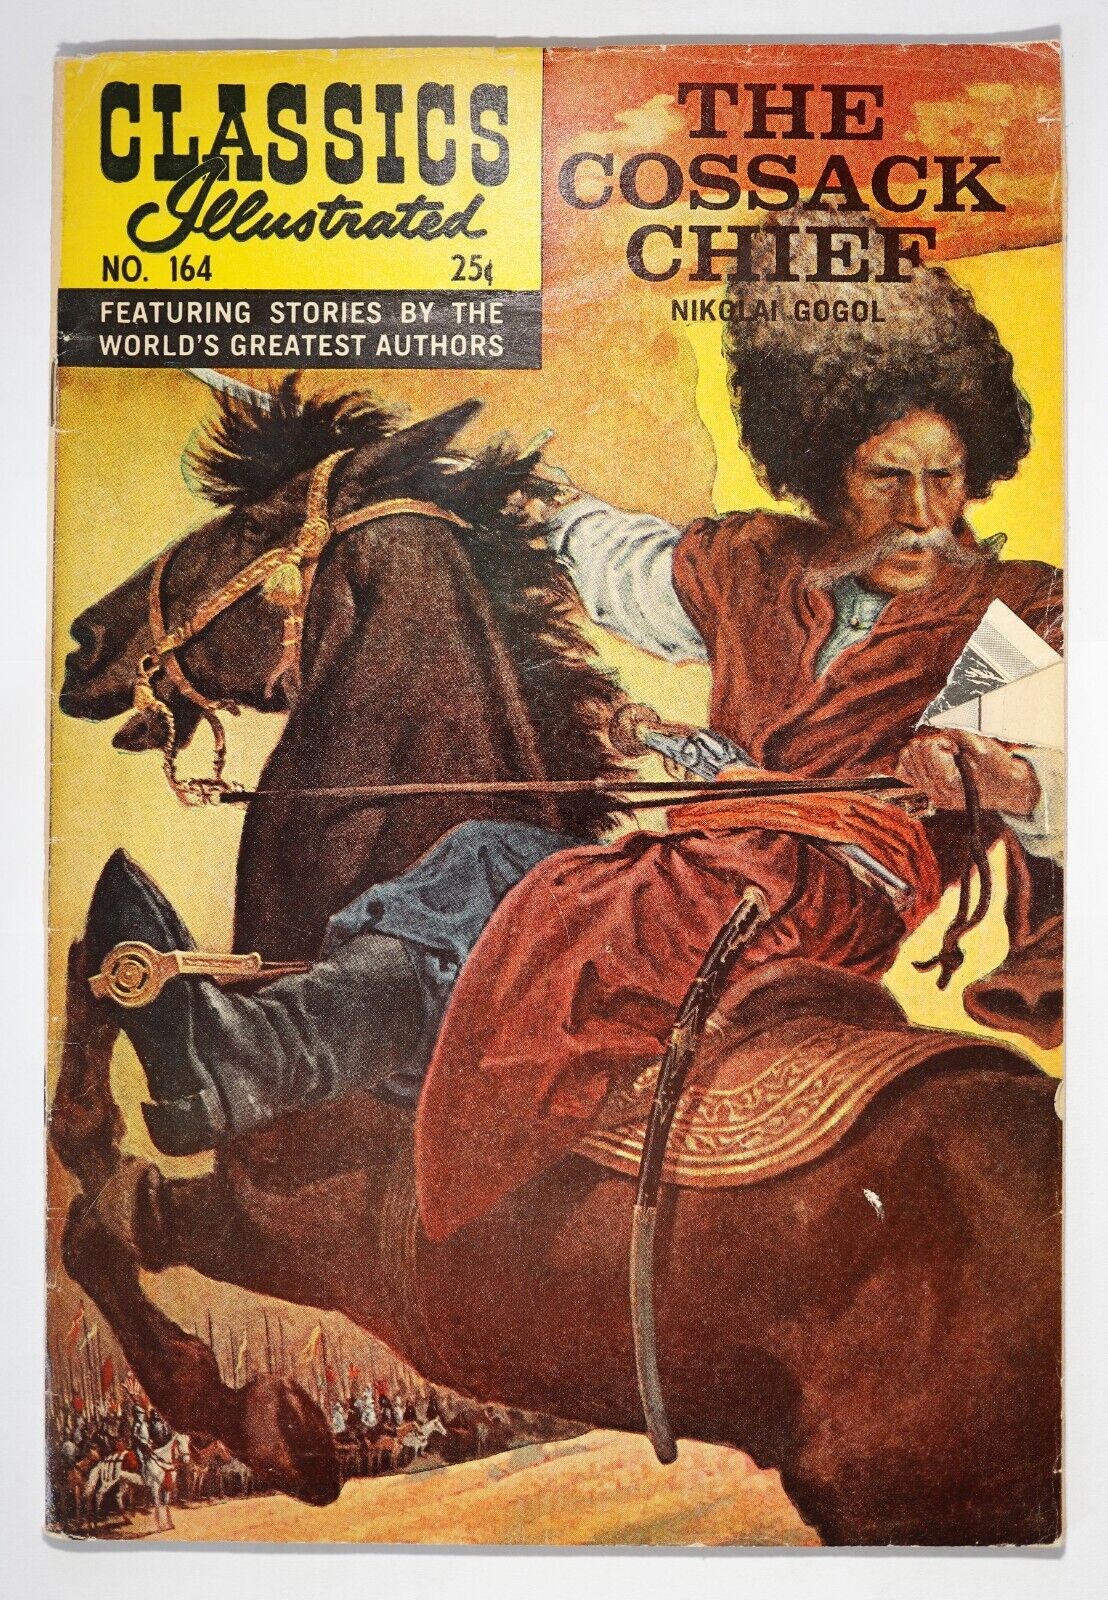 Classics Illustrated, The Cossack Chief #164, $0.25 - 3rd Ed. HRN 166 - FN